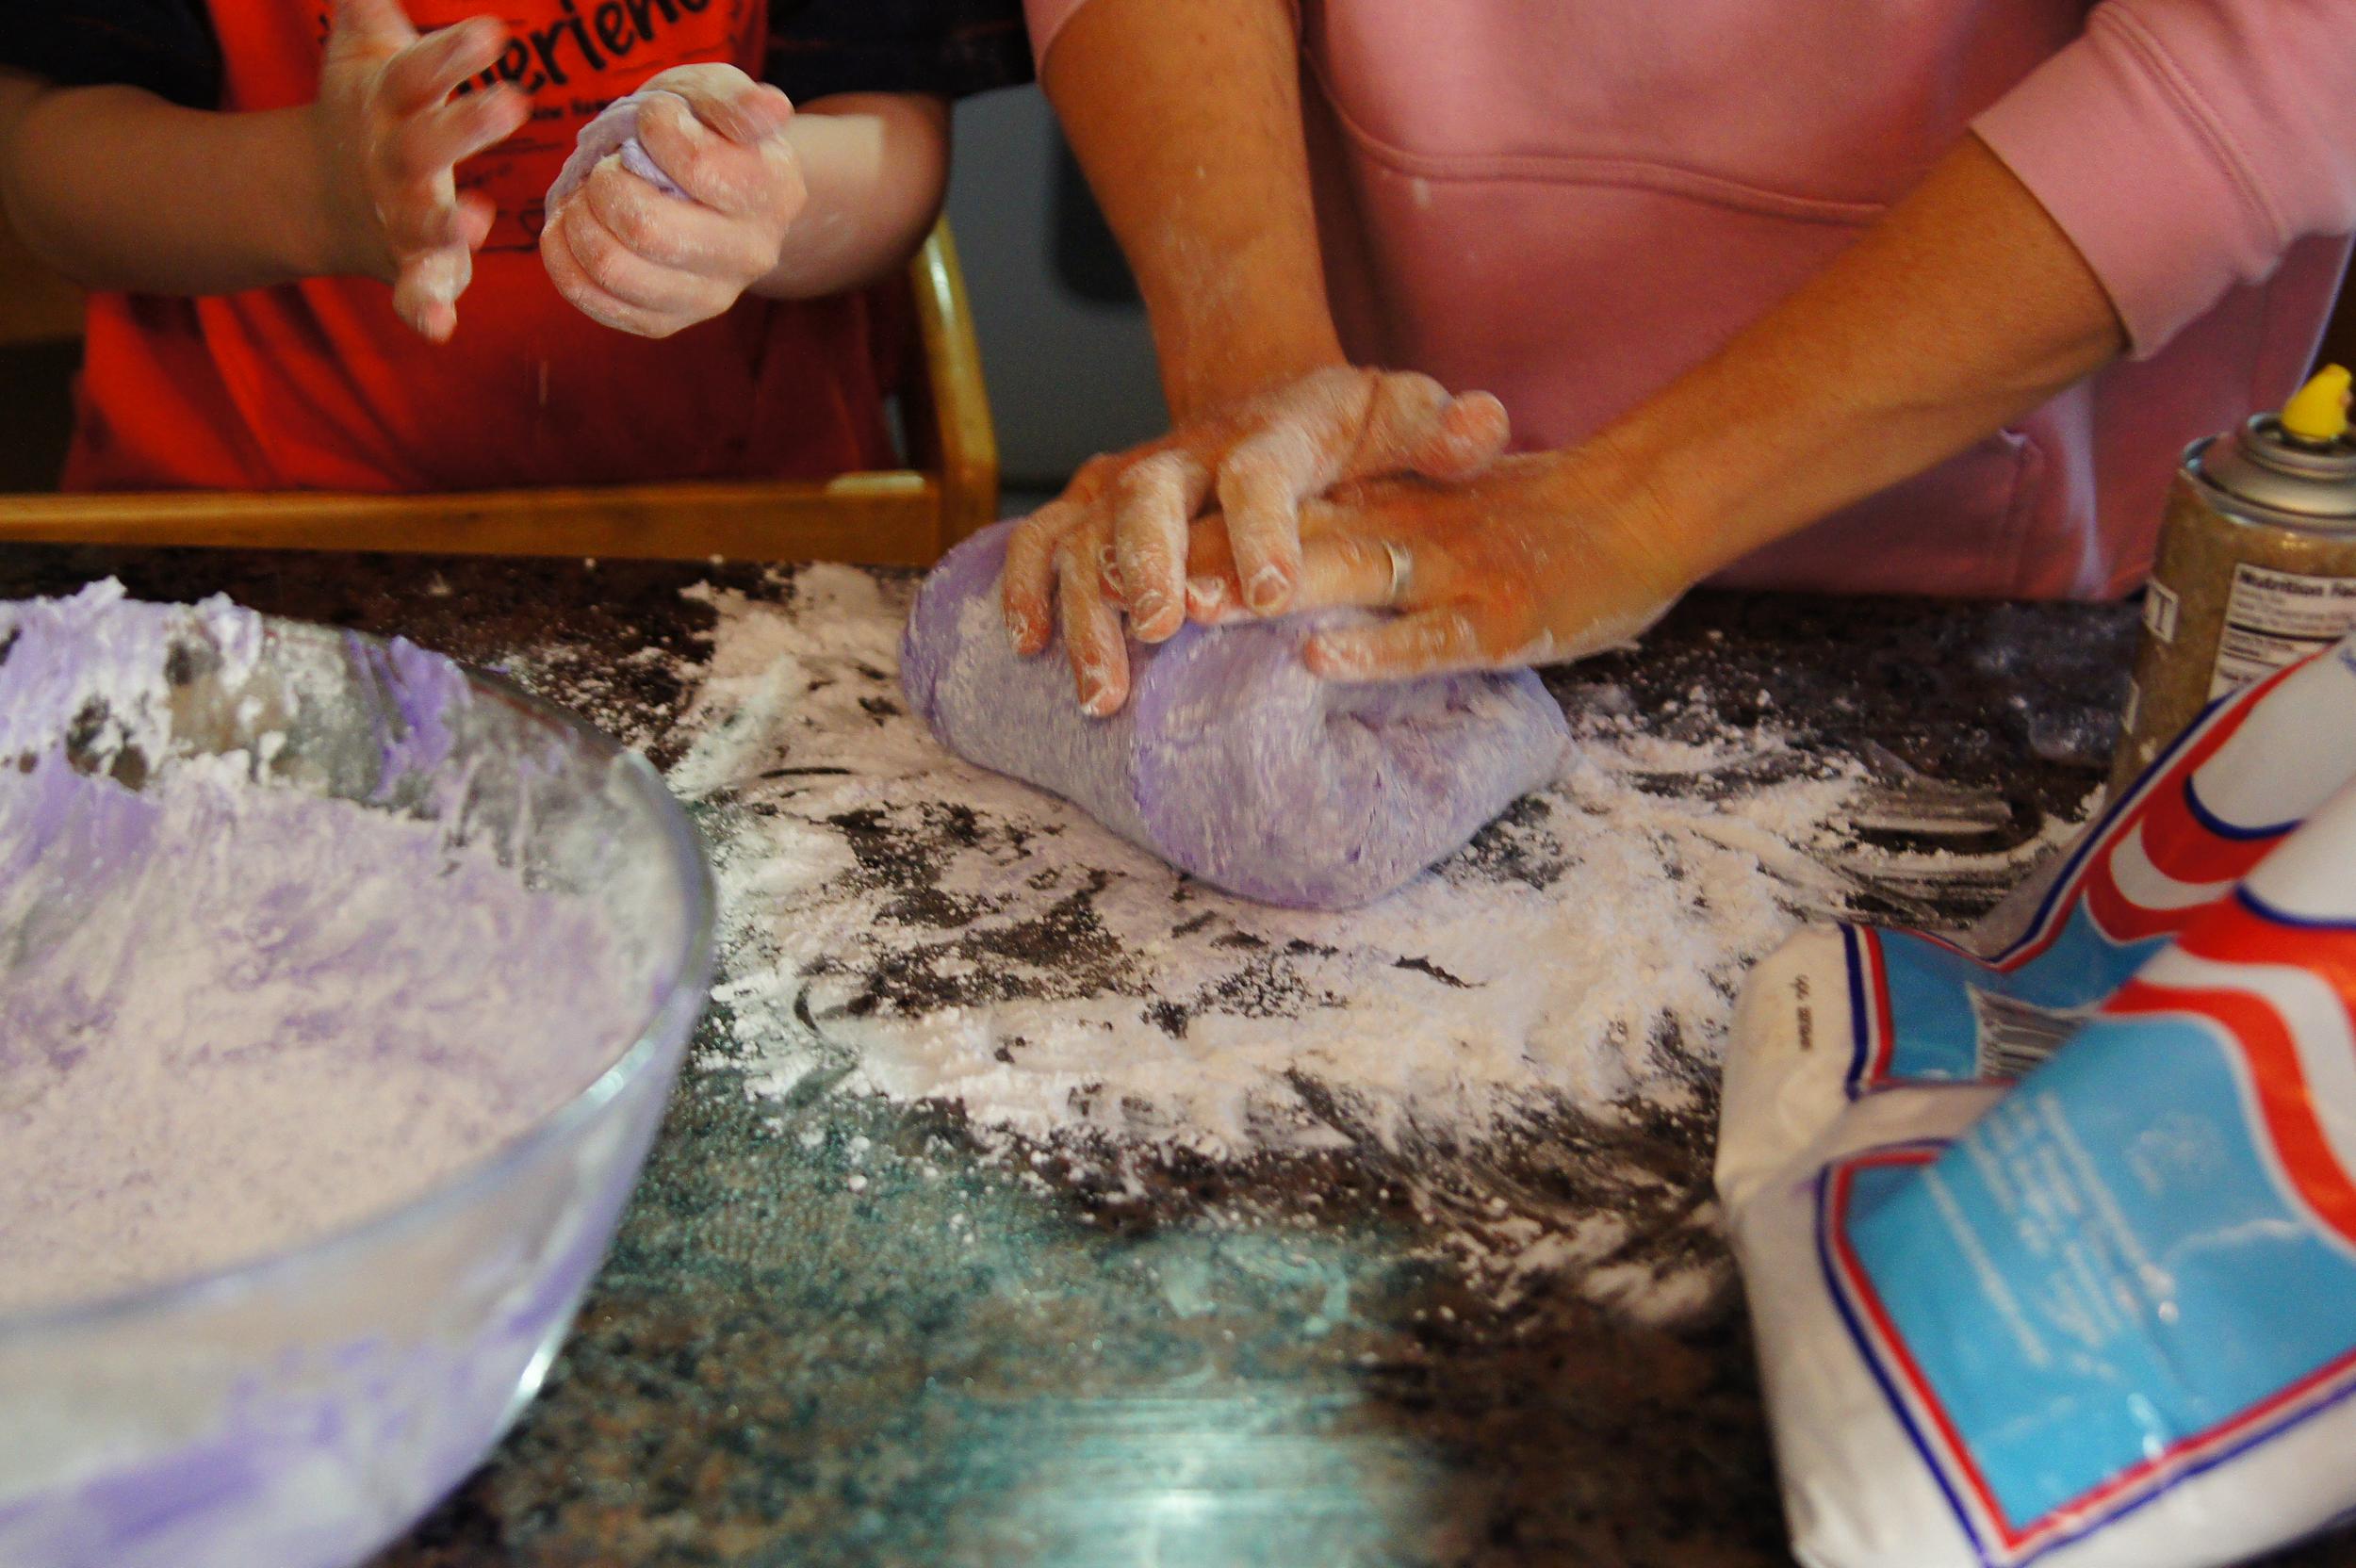 Working over the fondant.